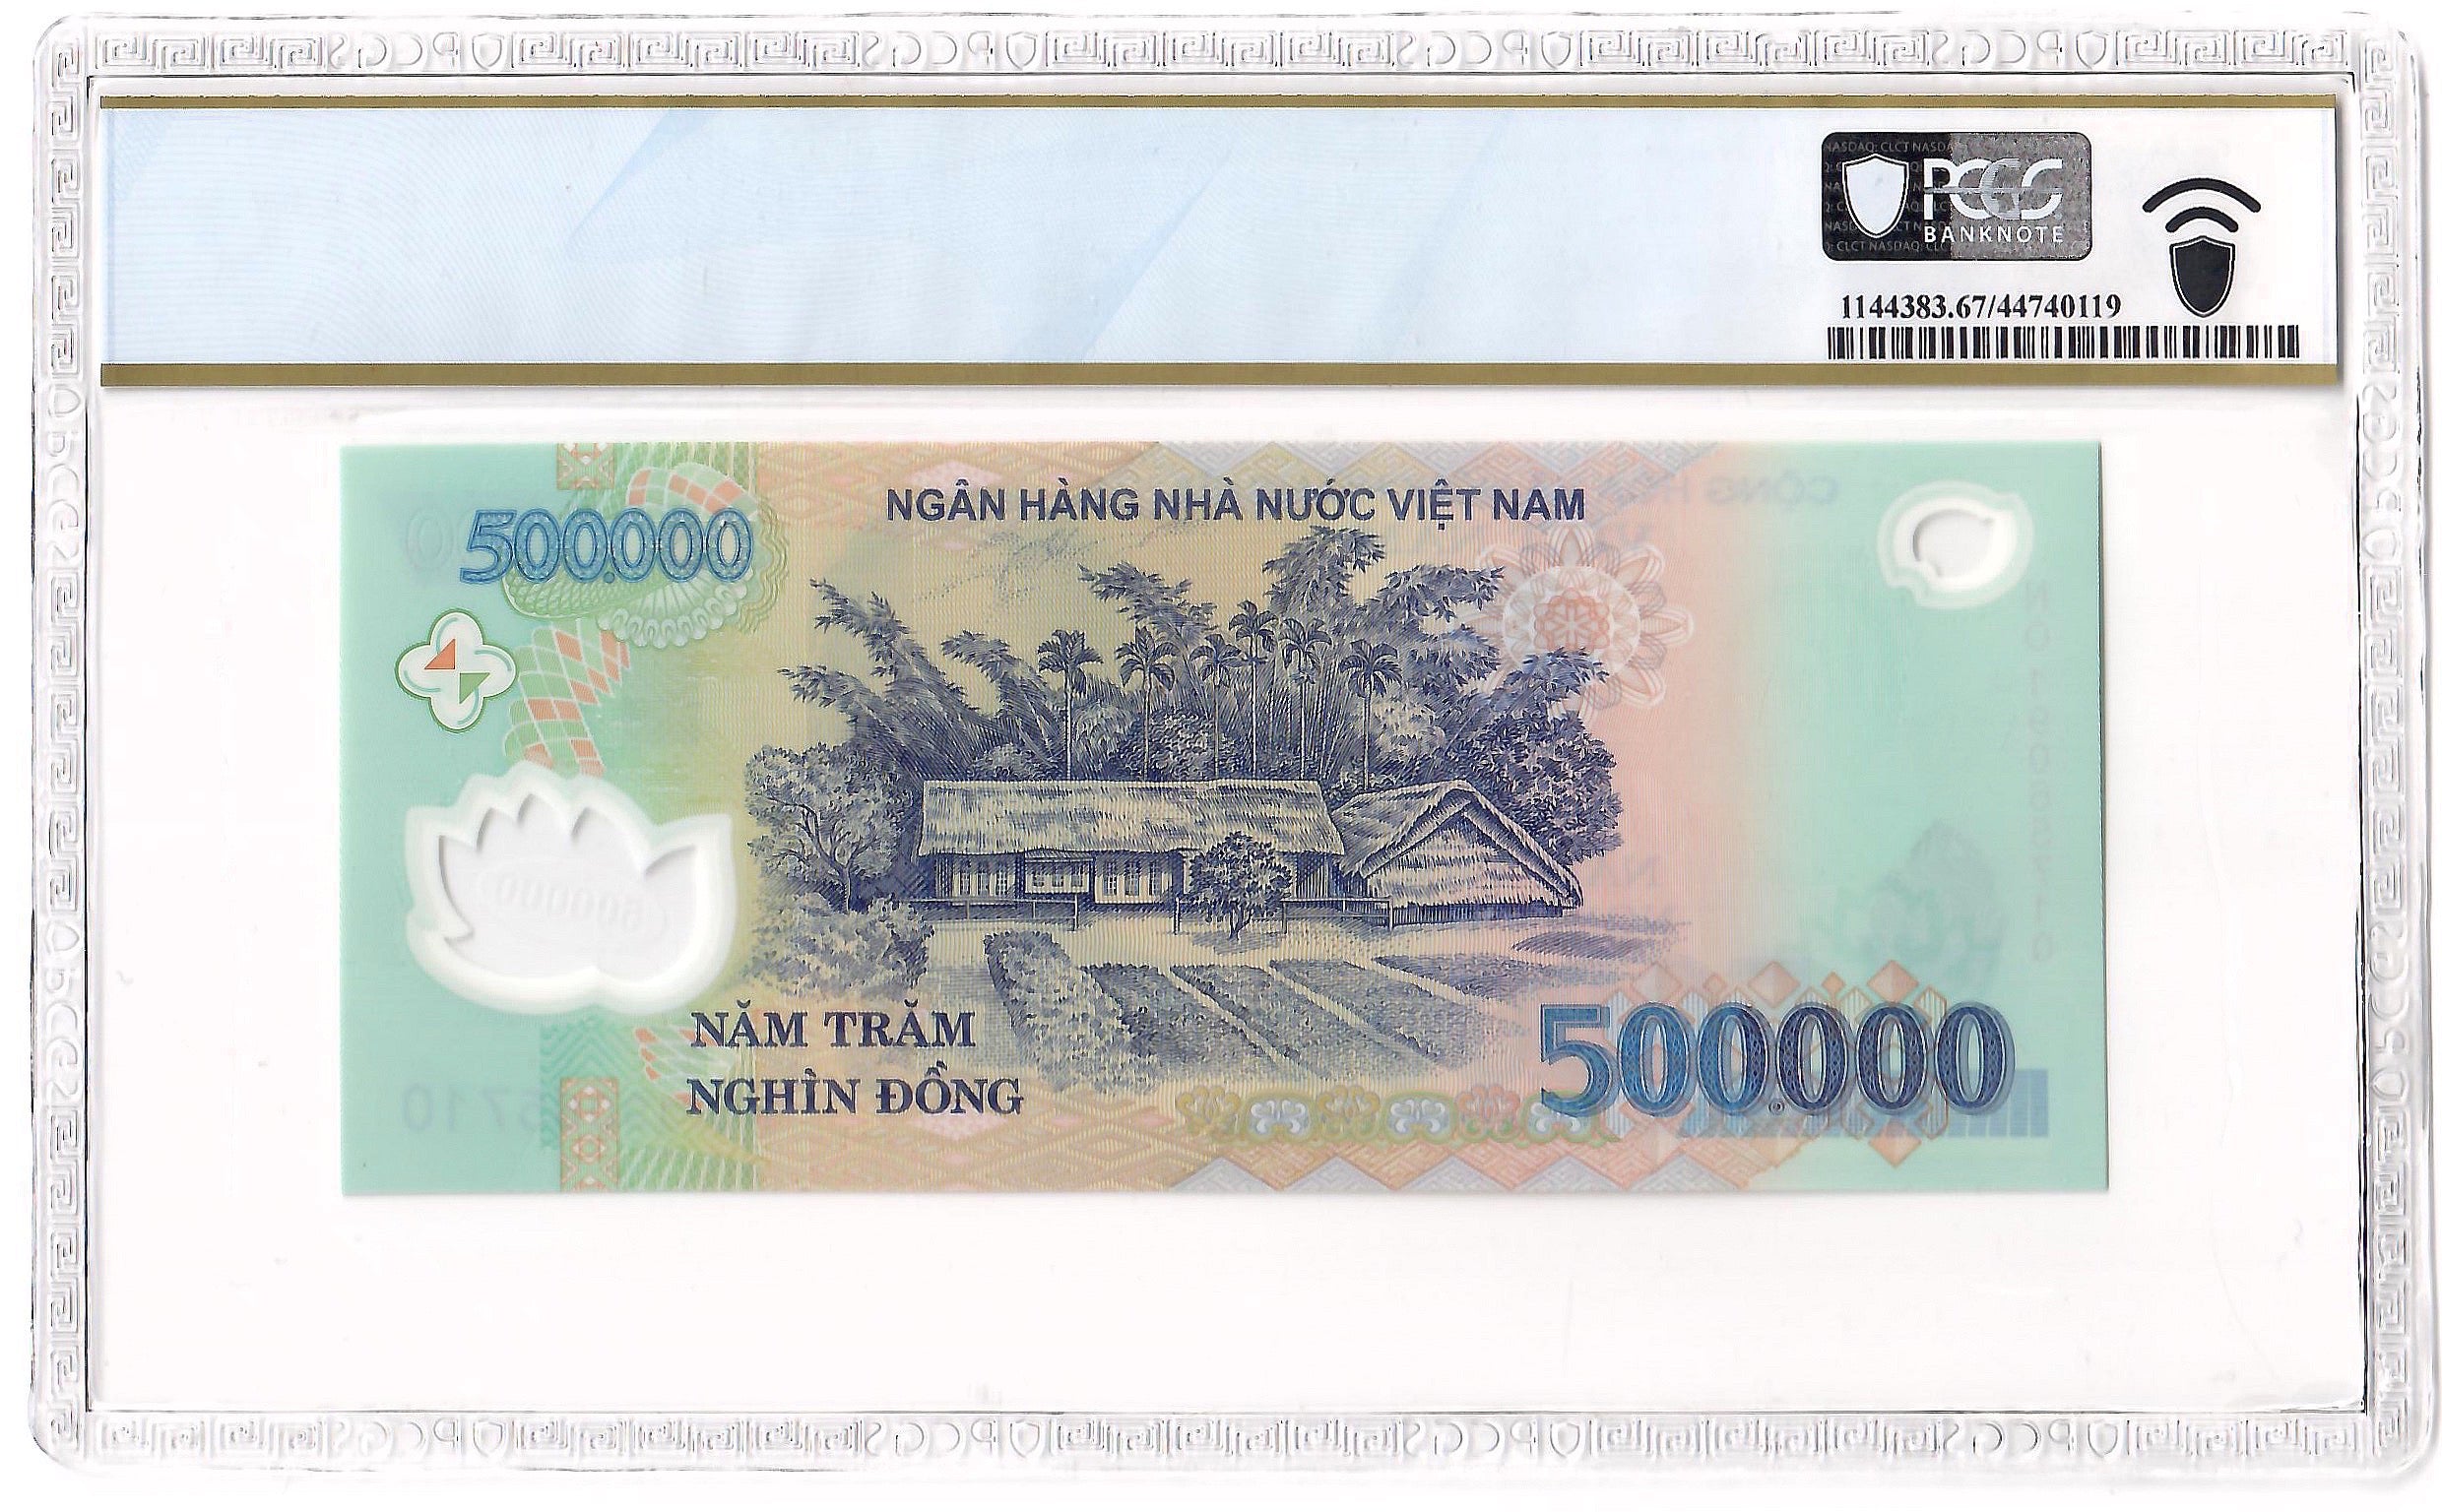 Vietnam 500,000 Dong Banknote, 2019, P-124o, UNC, Polymer - PCGS 67